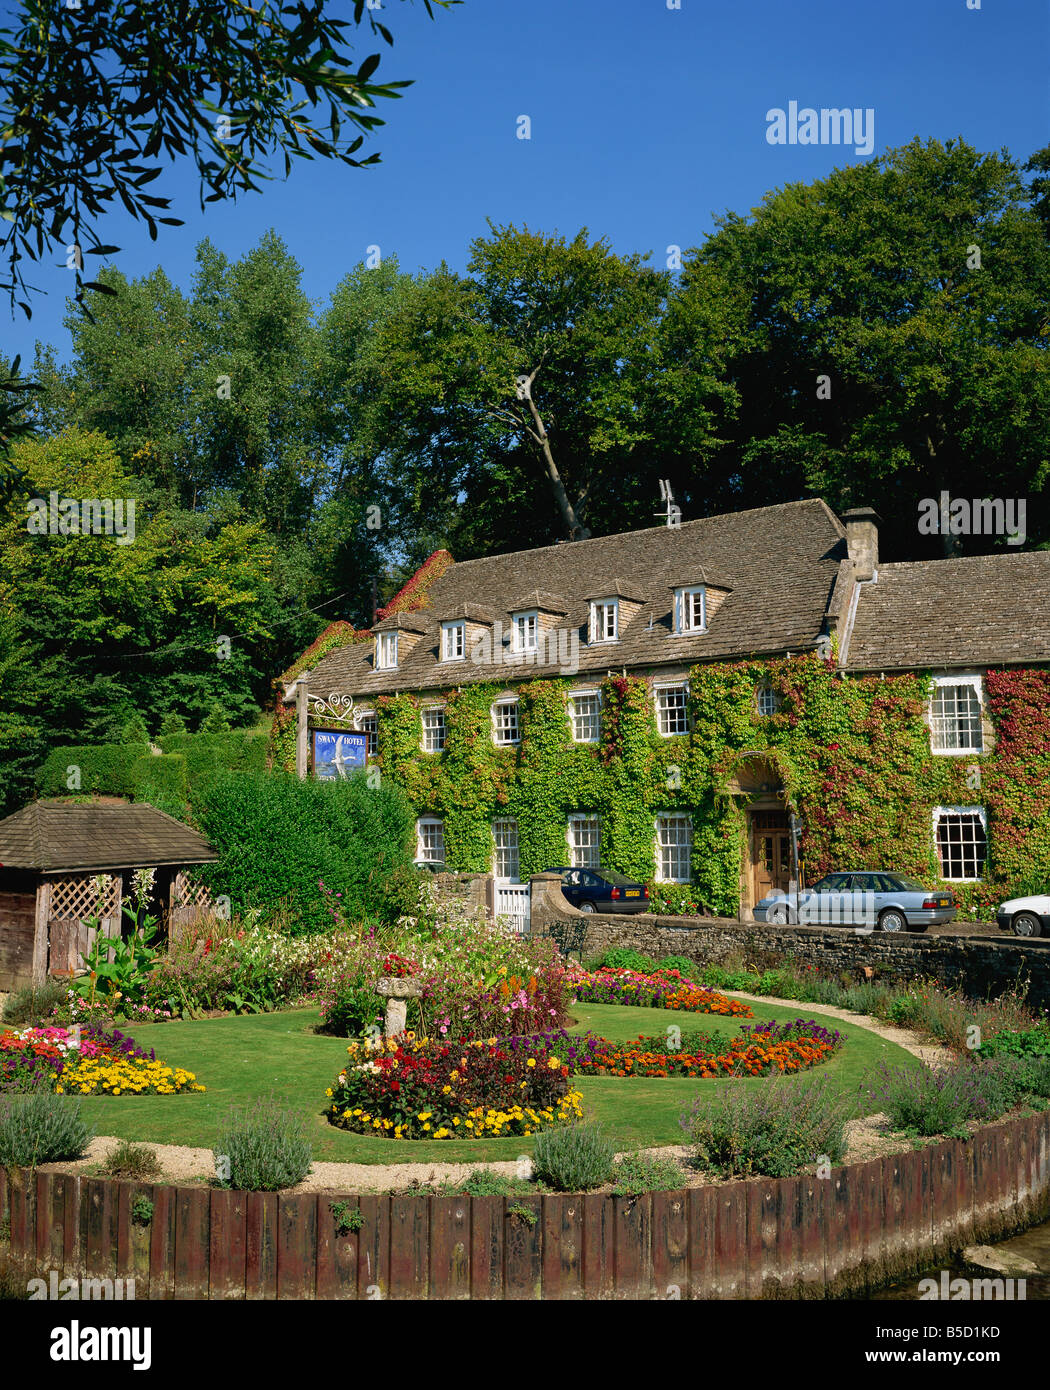 The Swan Hotel and garden full of summer flowers at Bibury in the Cotswolds Gloucestershire England R Rainford Stock Photo